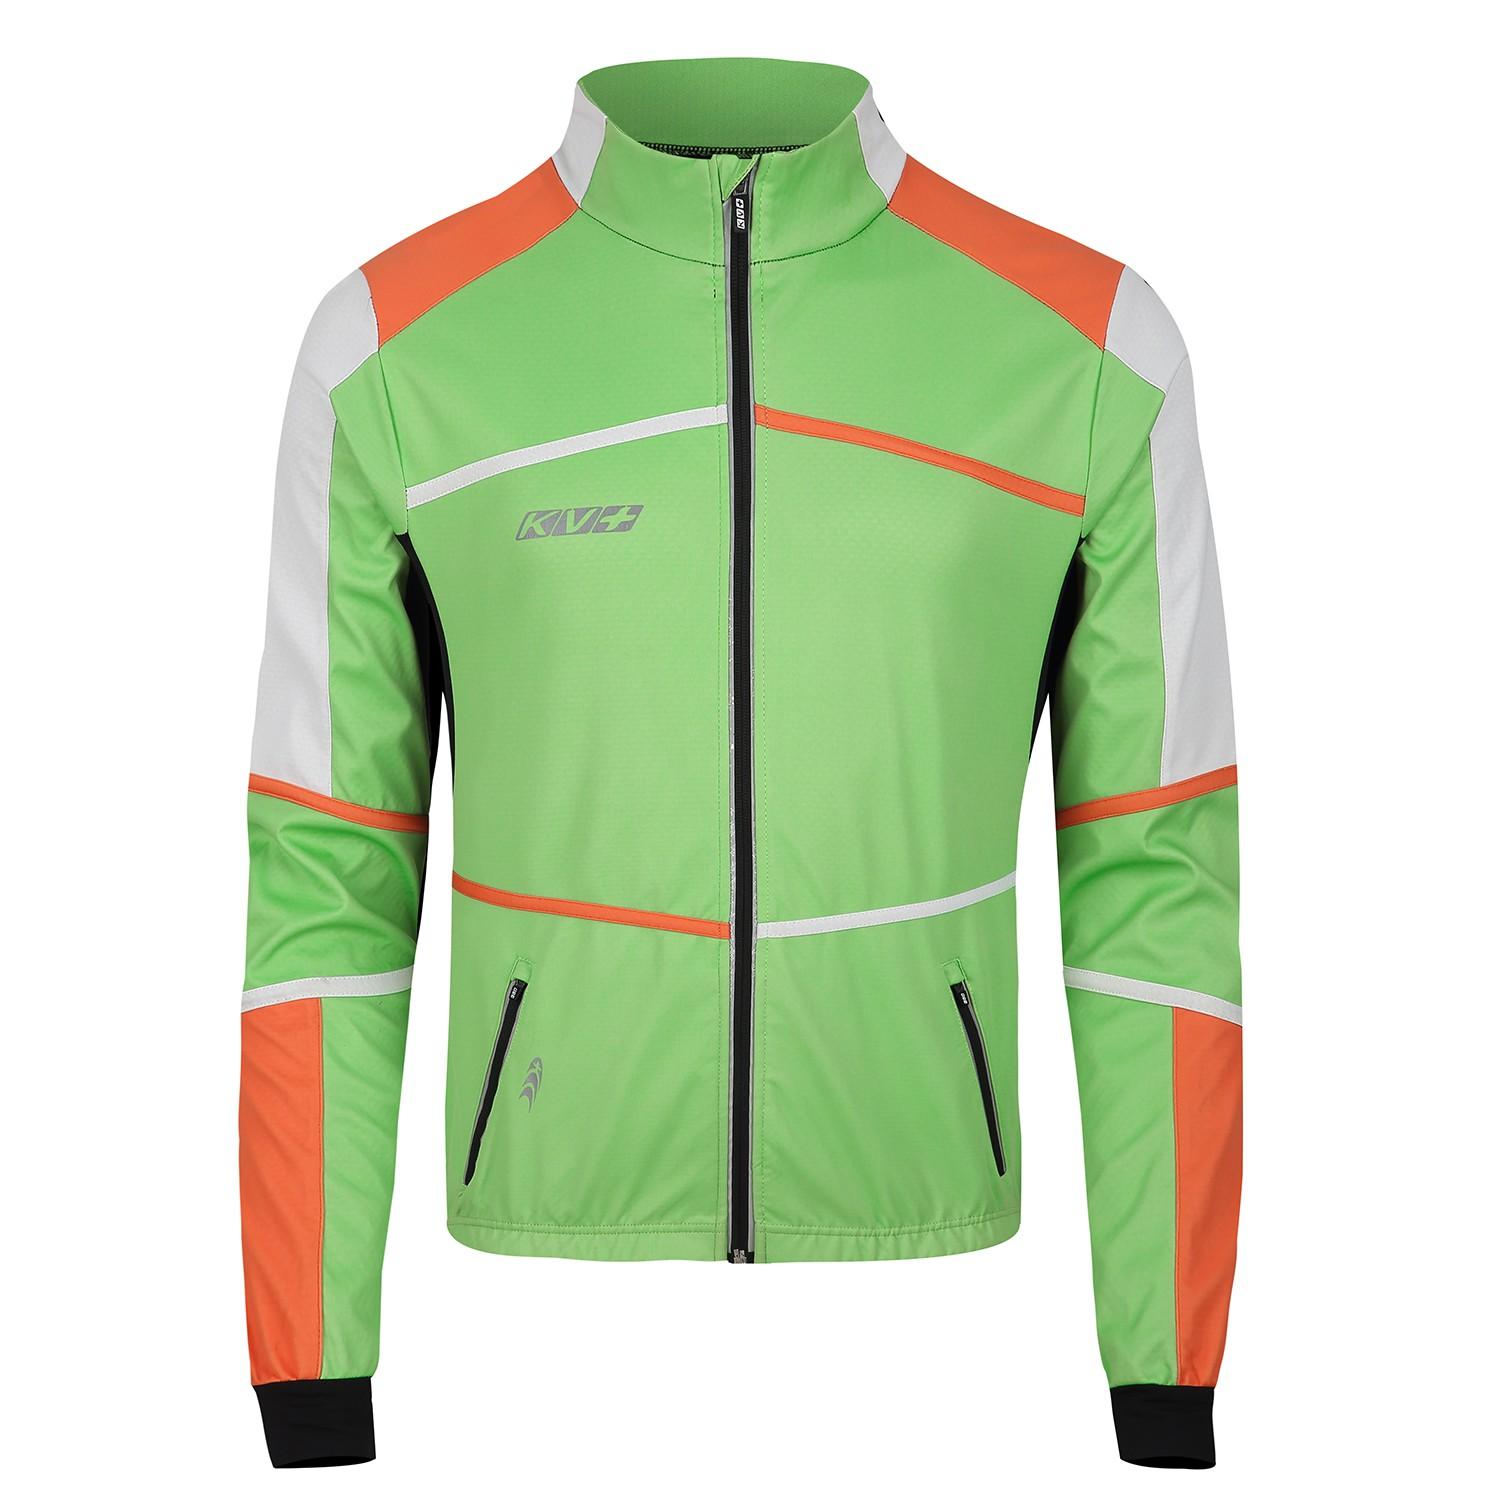 hybrid jacket with silicon anti slip tape for sport